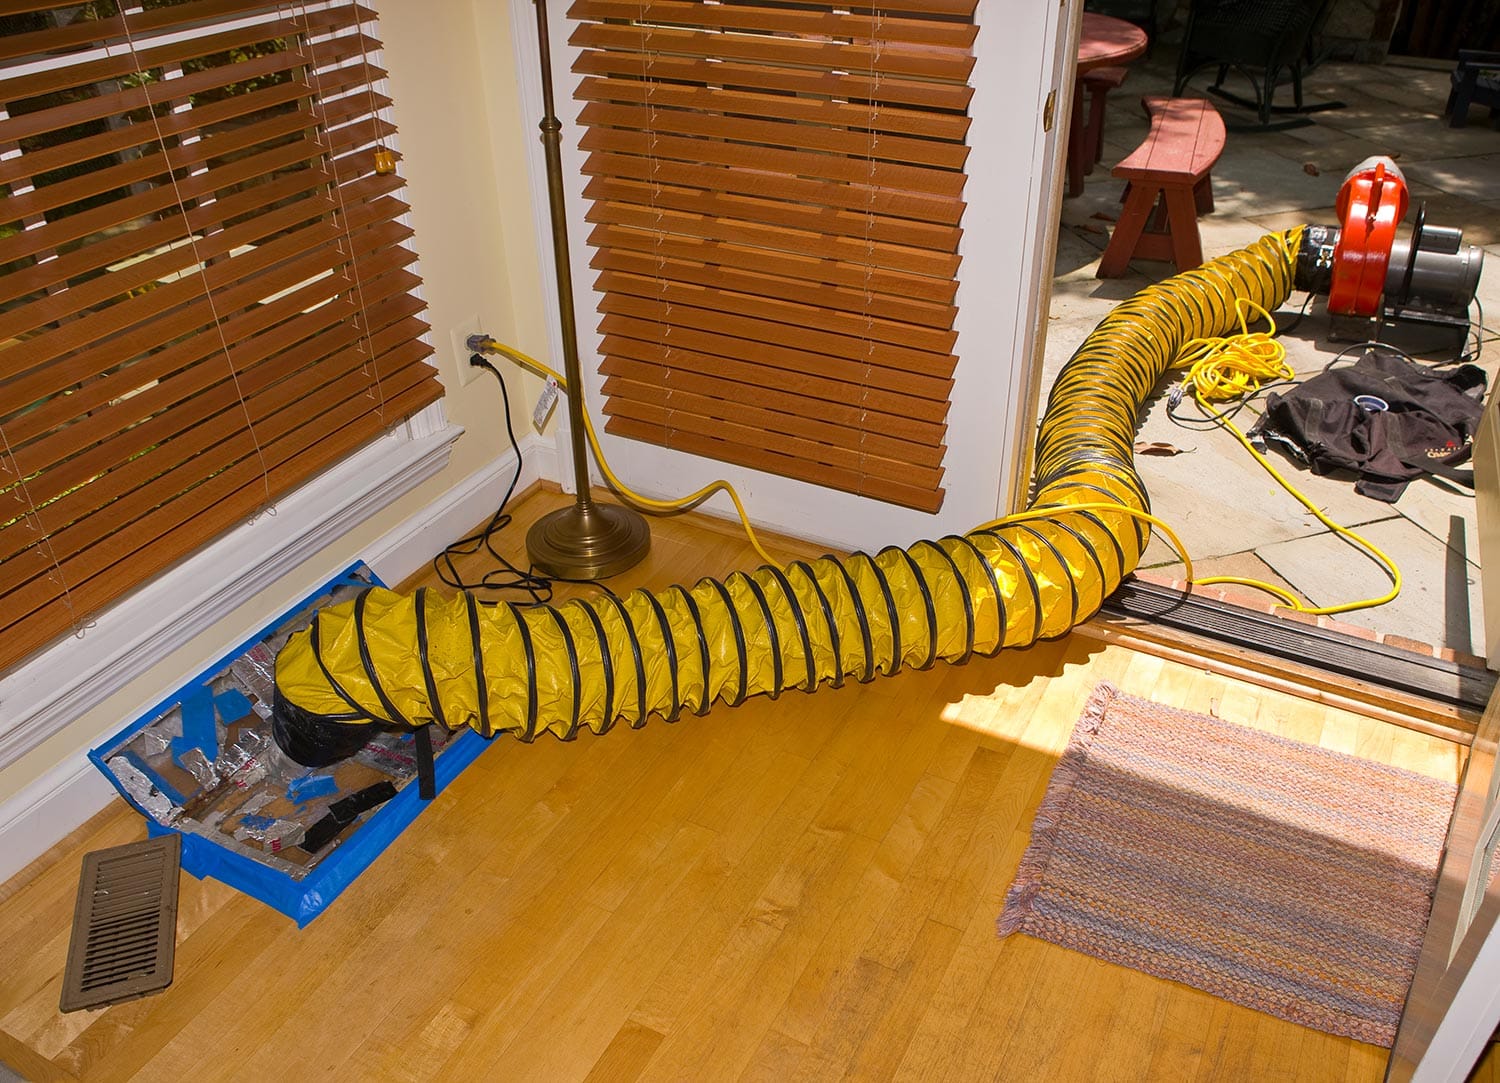 Blower attached to floor vent during duct cleaning in home